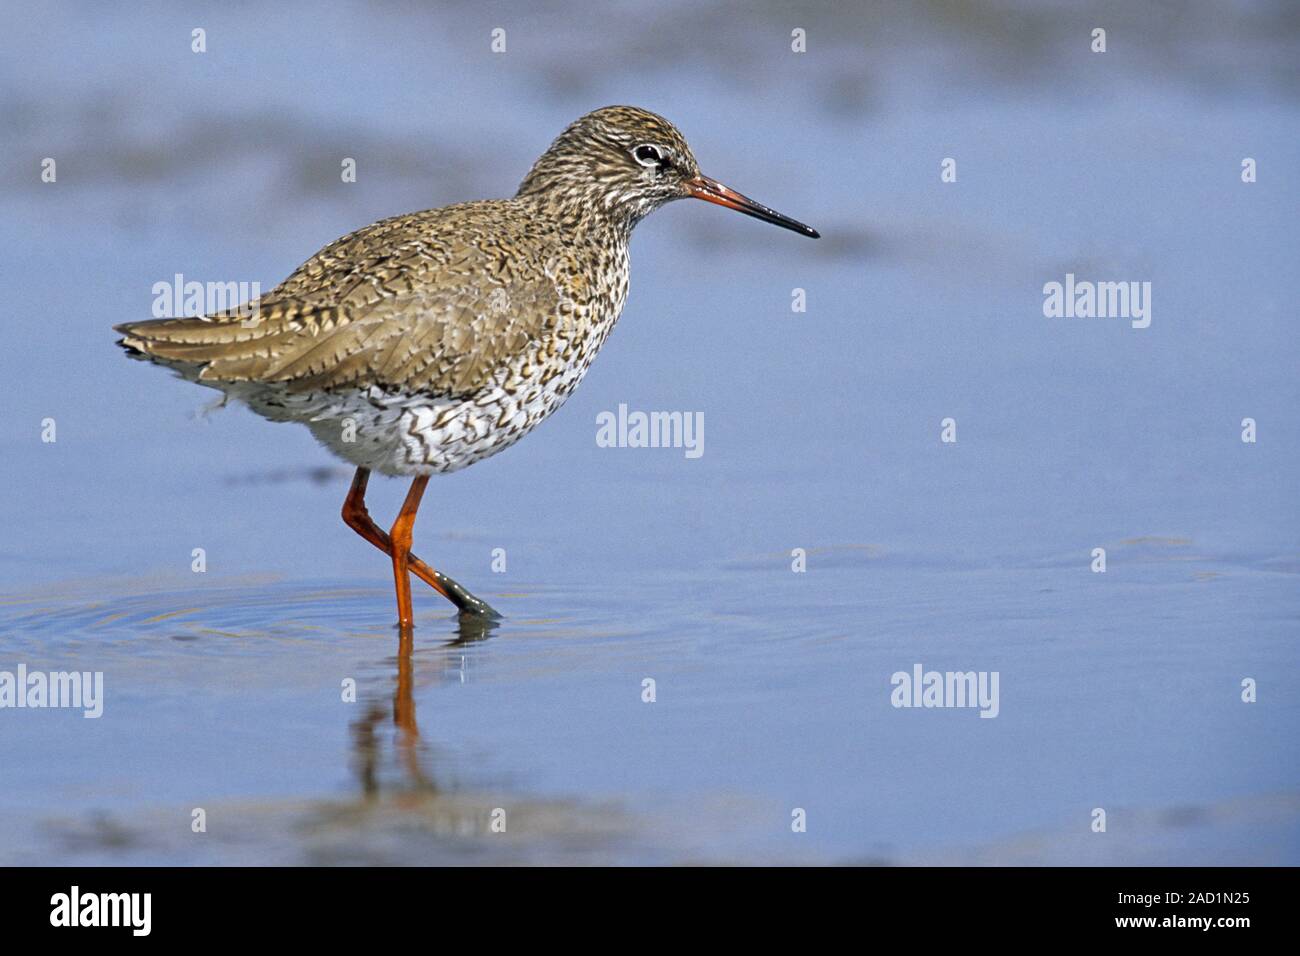 Common Redshank feeds on insects, worms, snails, crustaceans and molluscs Stock Photo